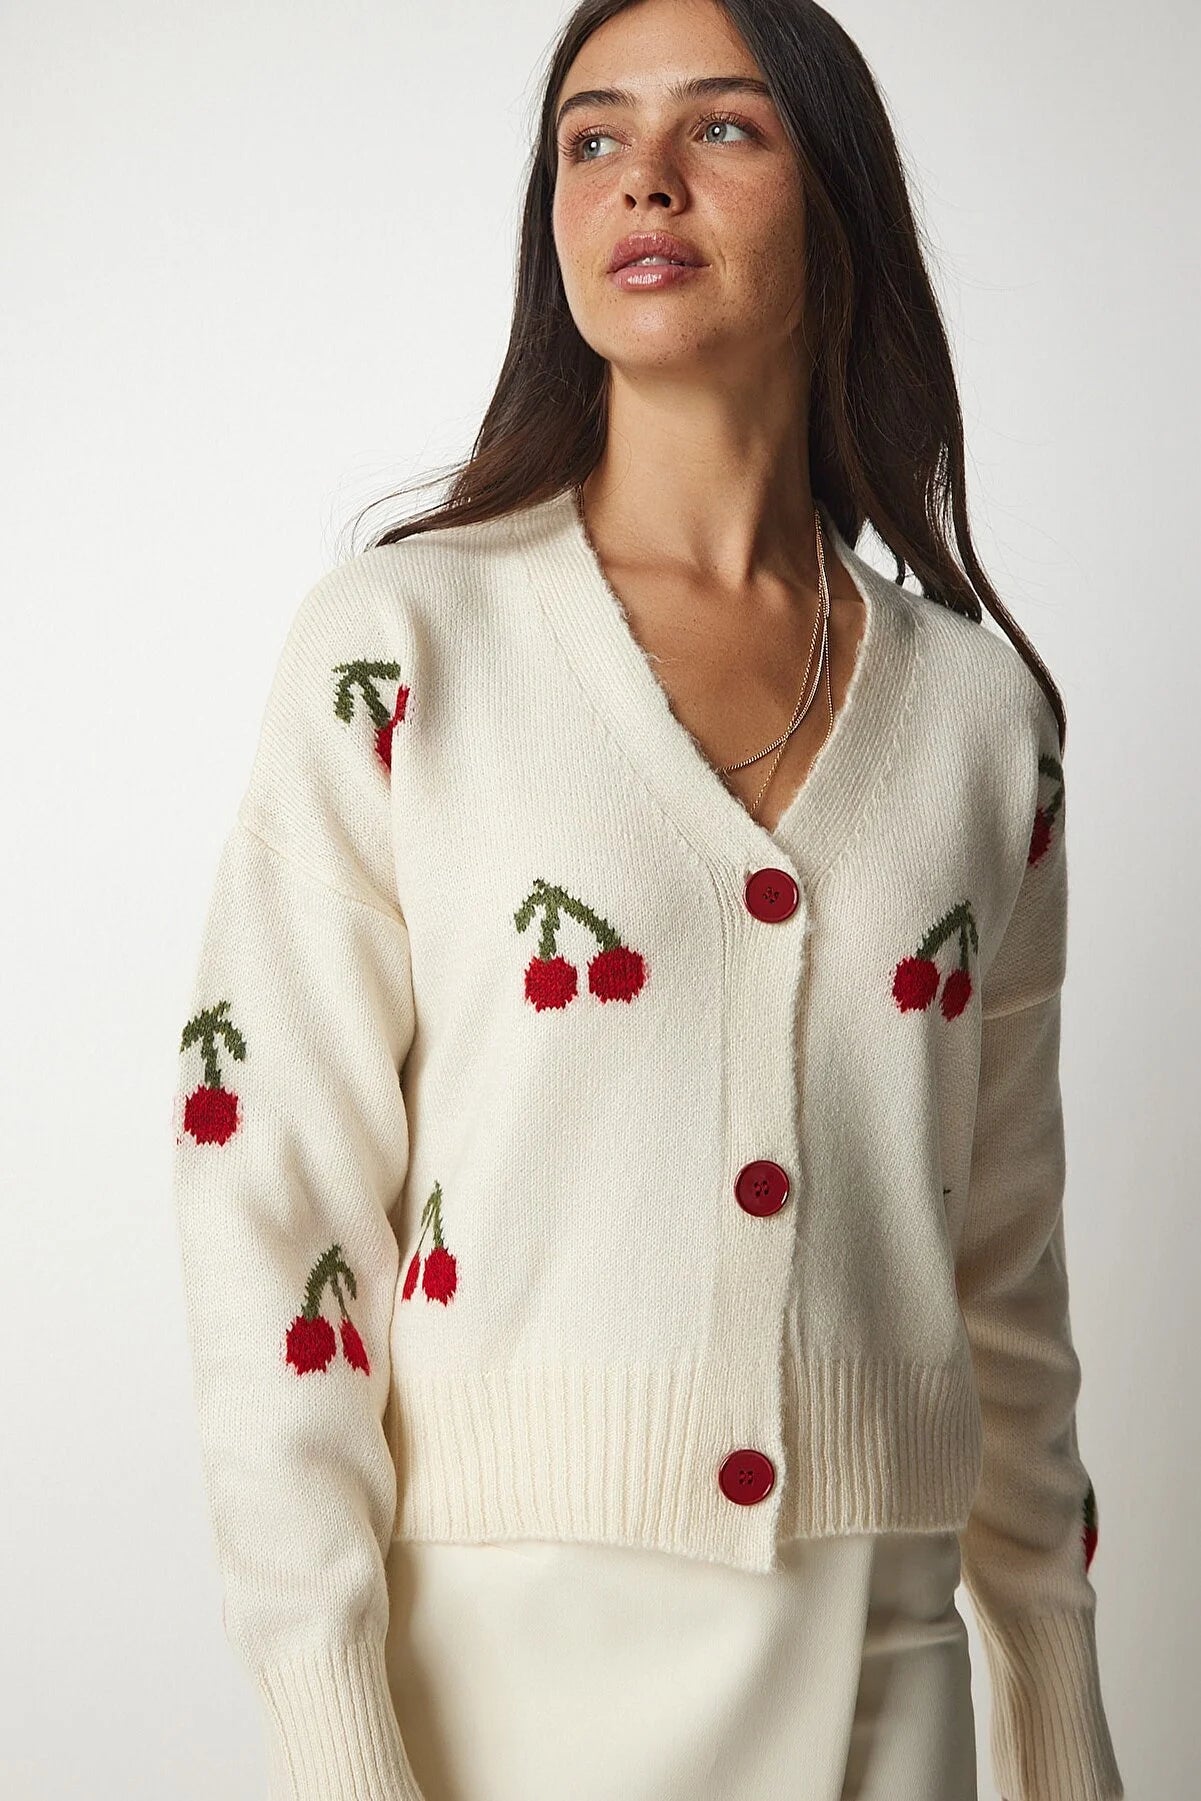 White Cherry Cardigan With Red Buttons